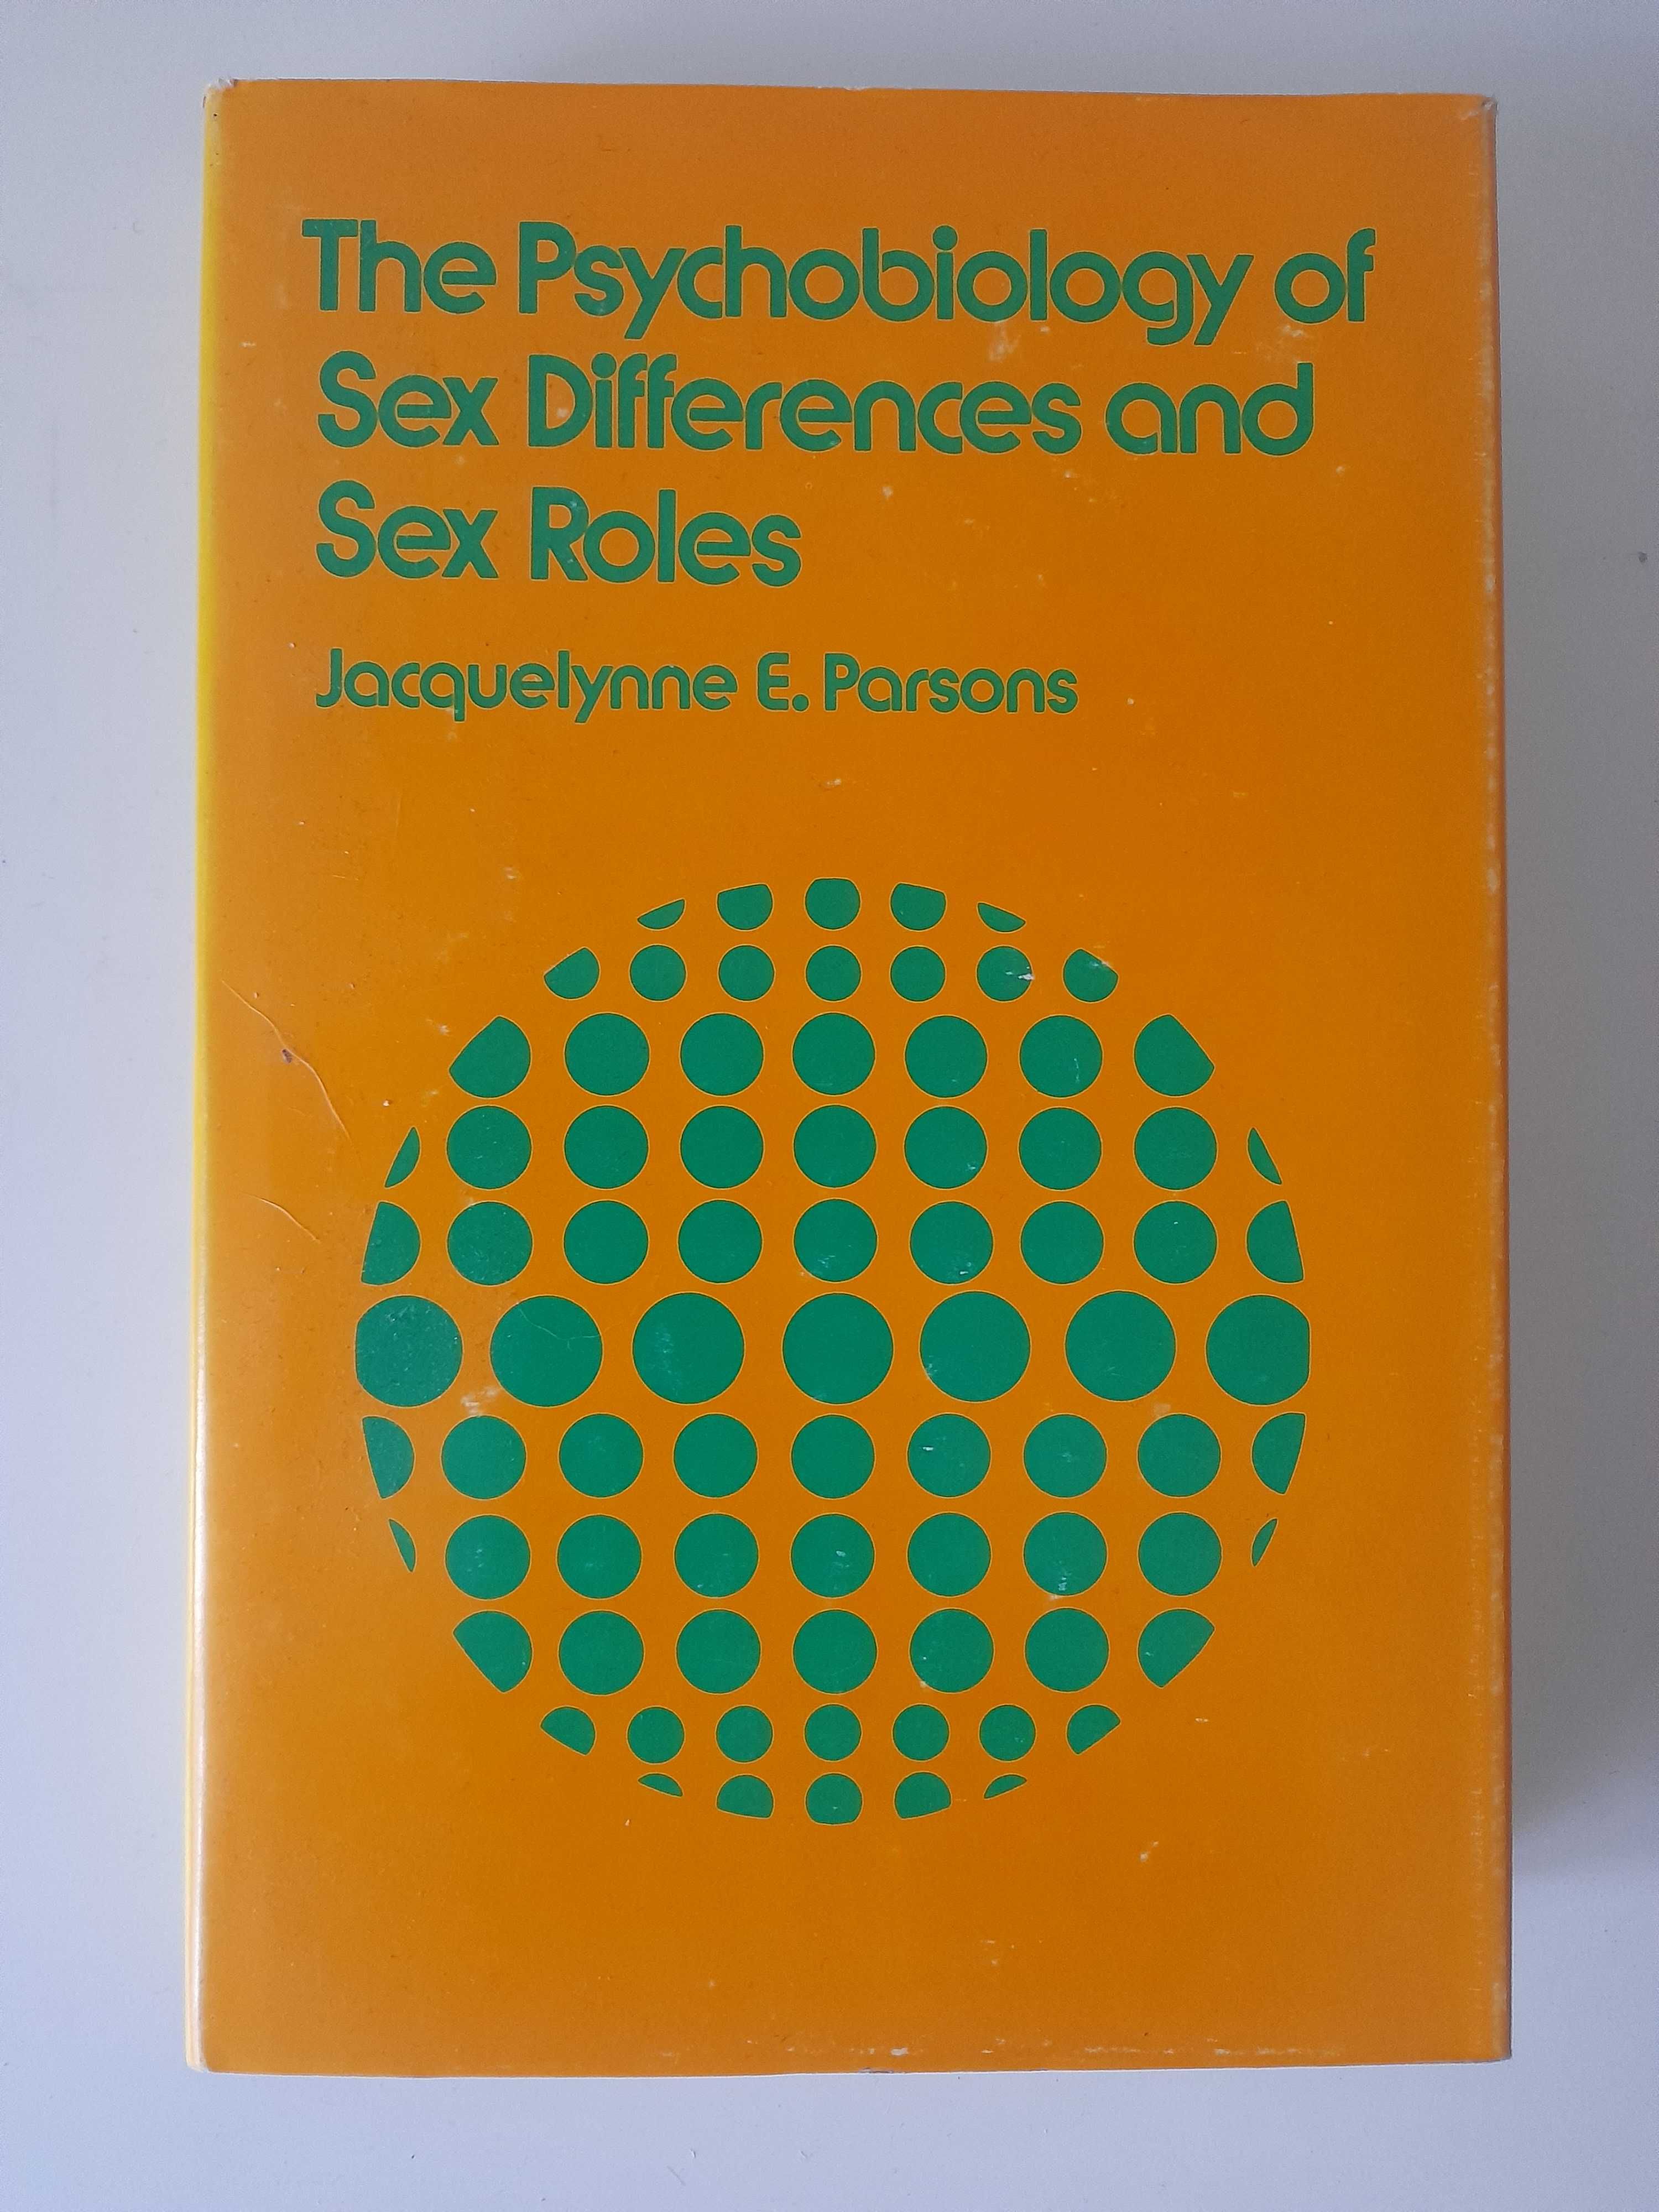 The Psychogilogy of Sex Differences and Sex Roles Jacquelynne Parsons